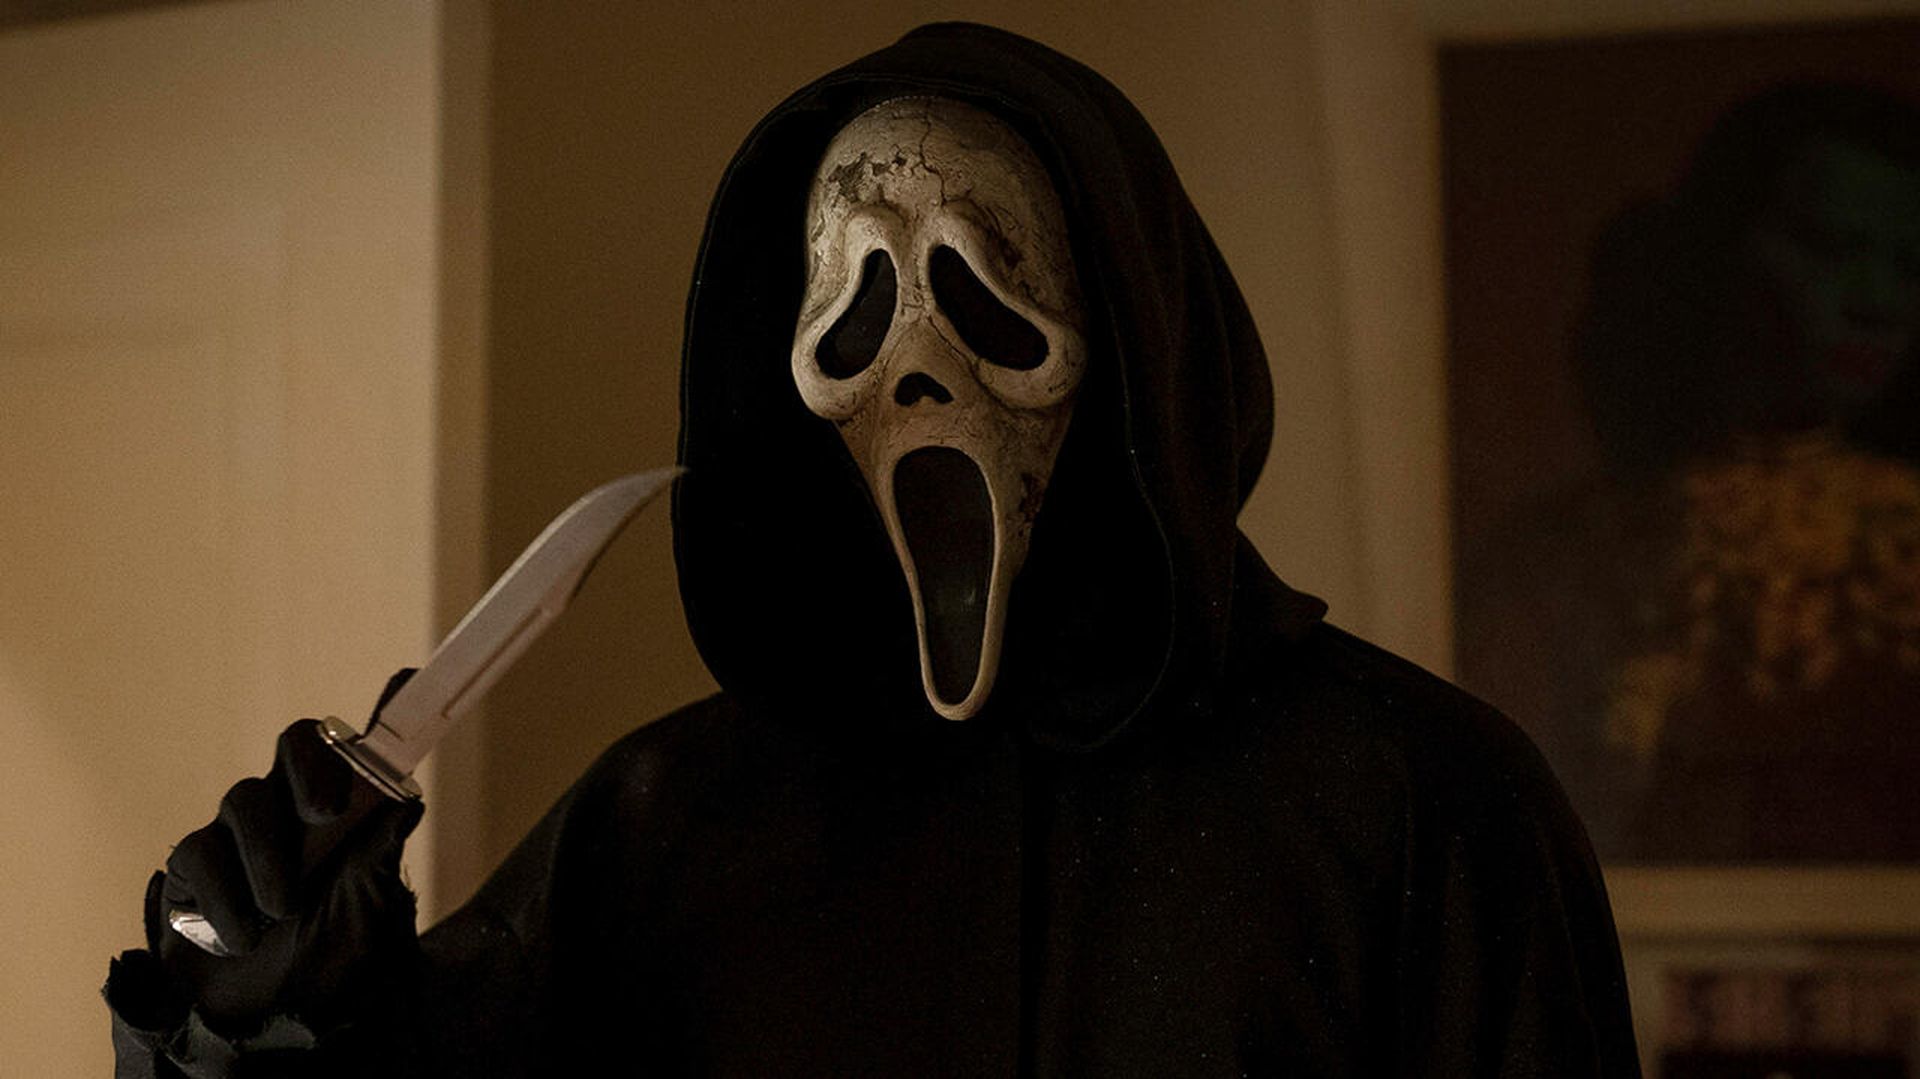 Today, we're going to be covering the Scream 6 playlist, all the songs in it, and their artists so you can enjoy the movie's songs at the leisure of your home.